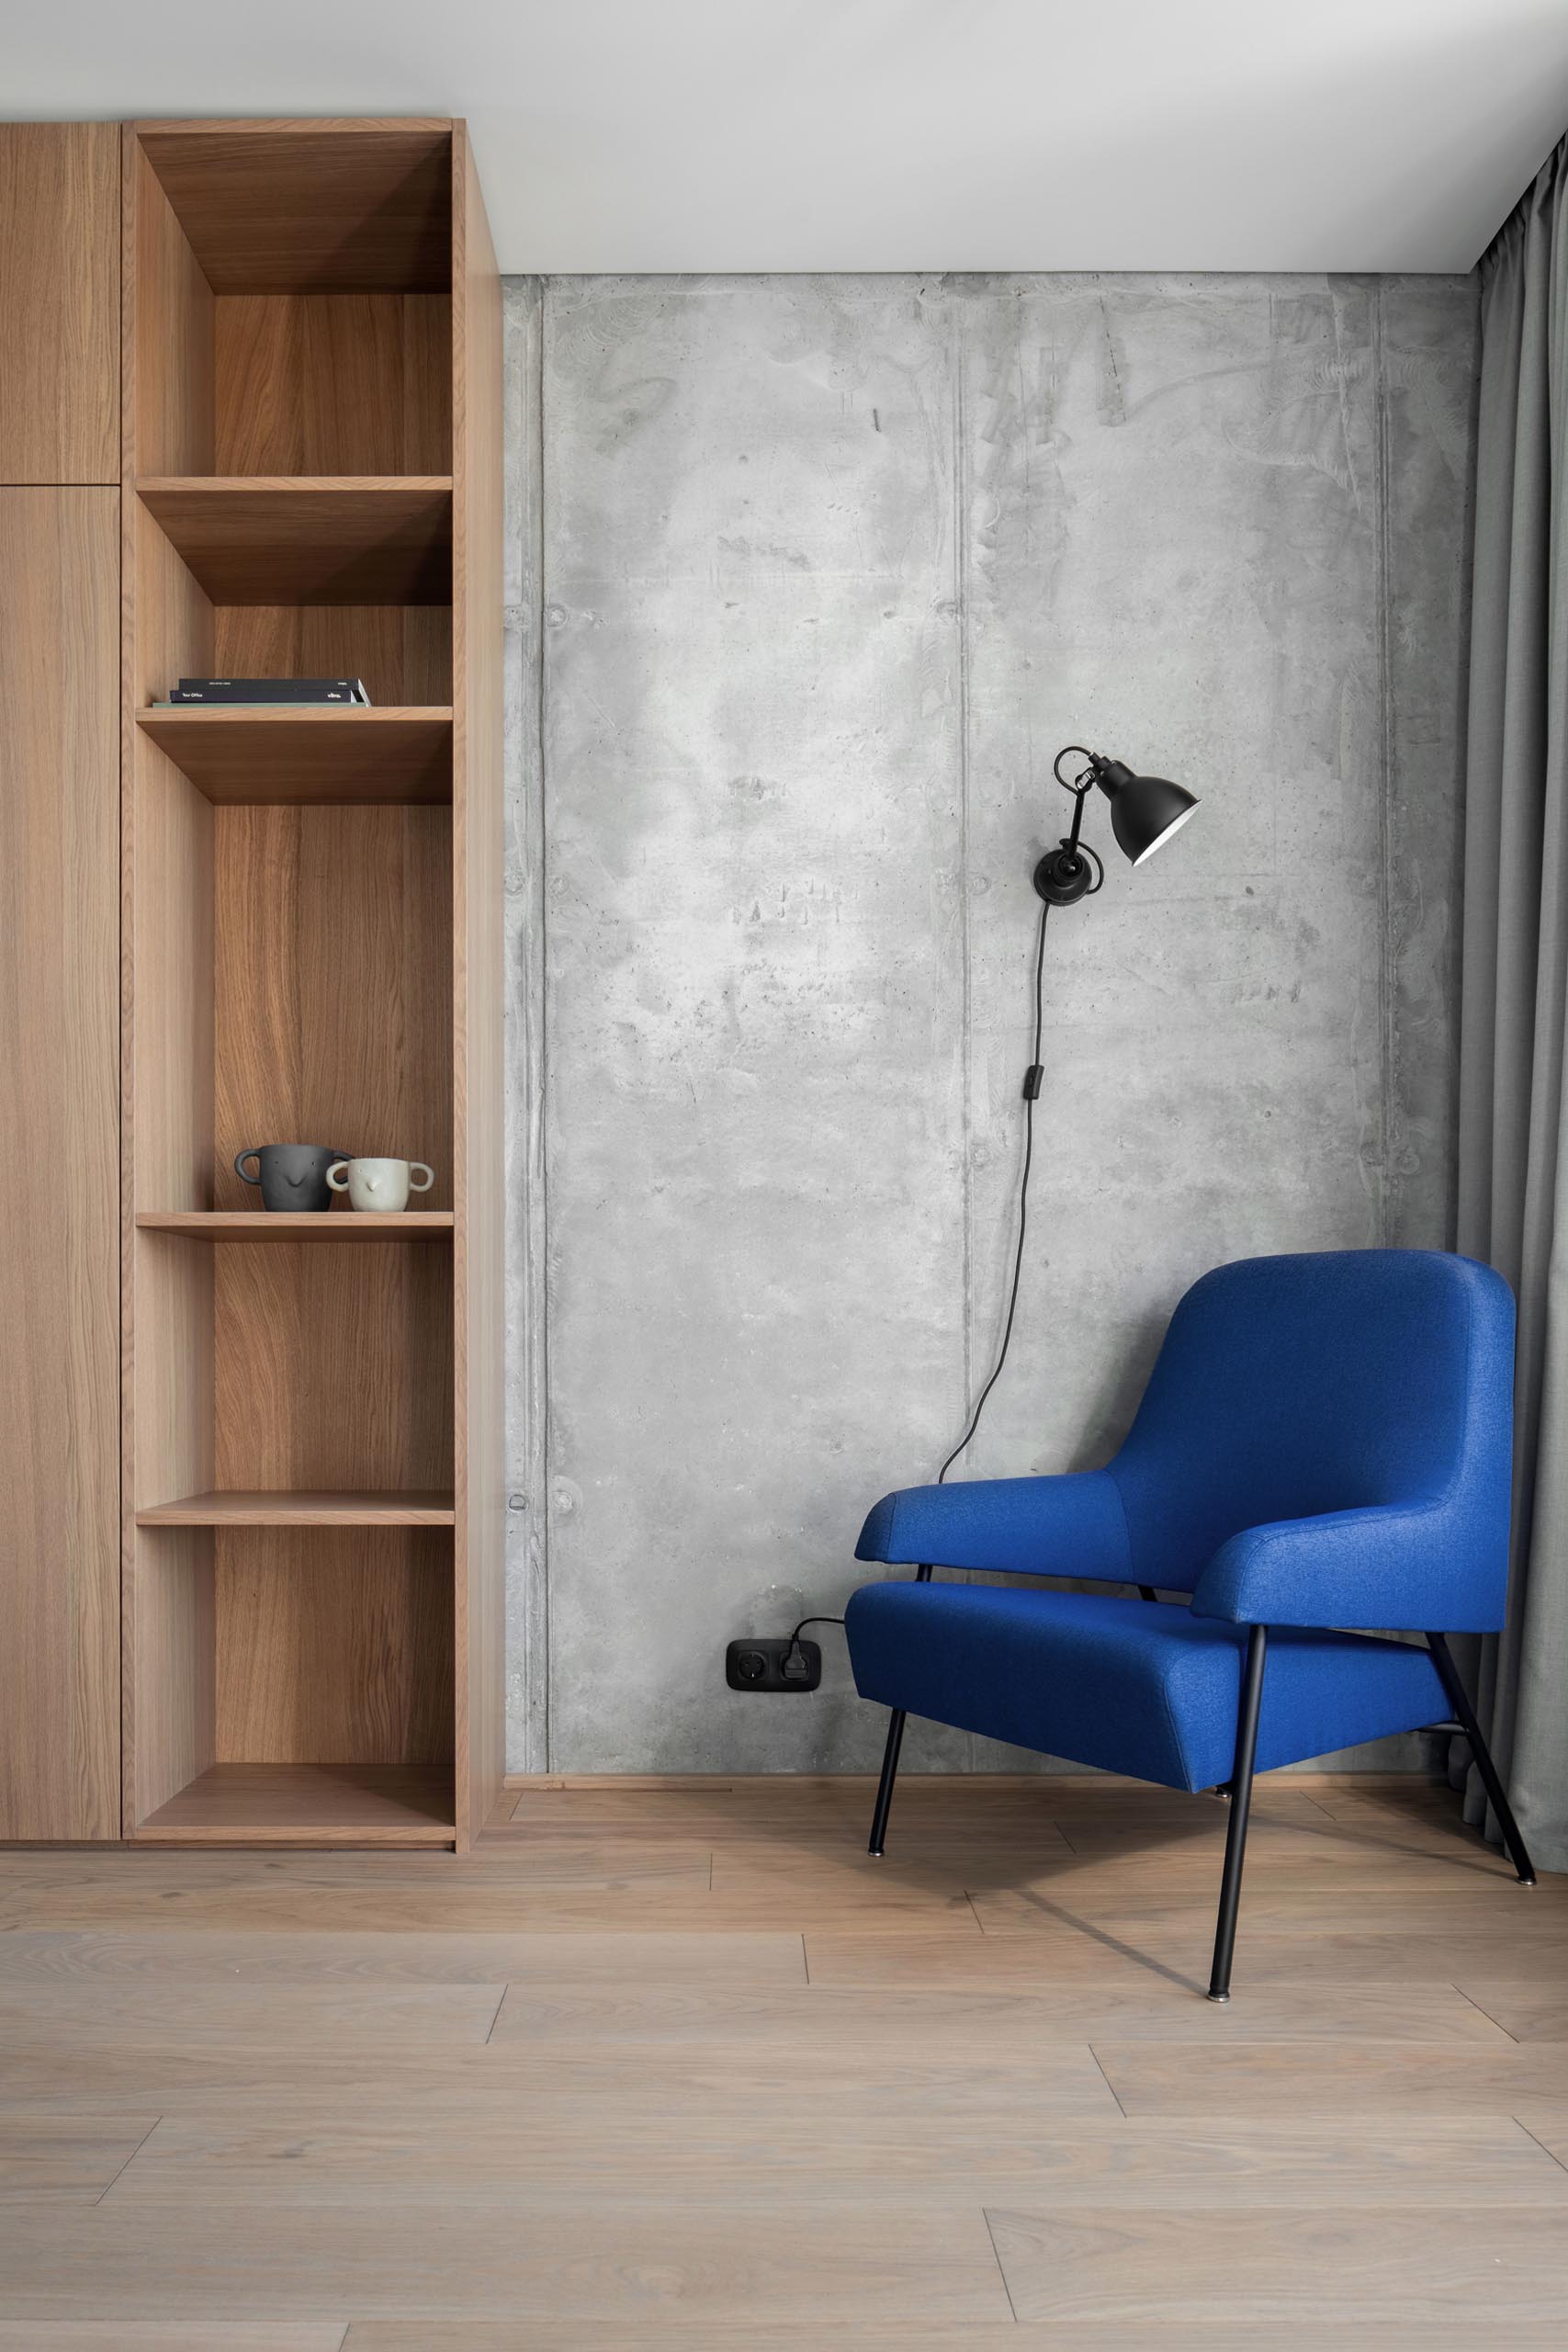 A modern home office with long curtains, a blue armchair, wood shelving, and a concrete wall.